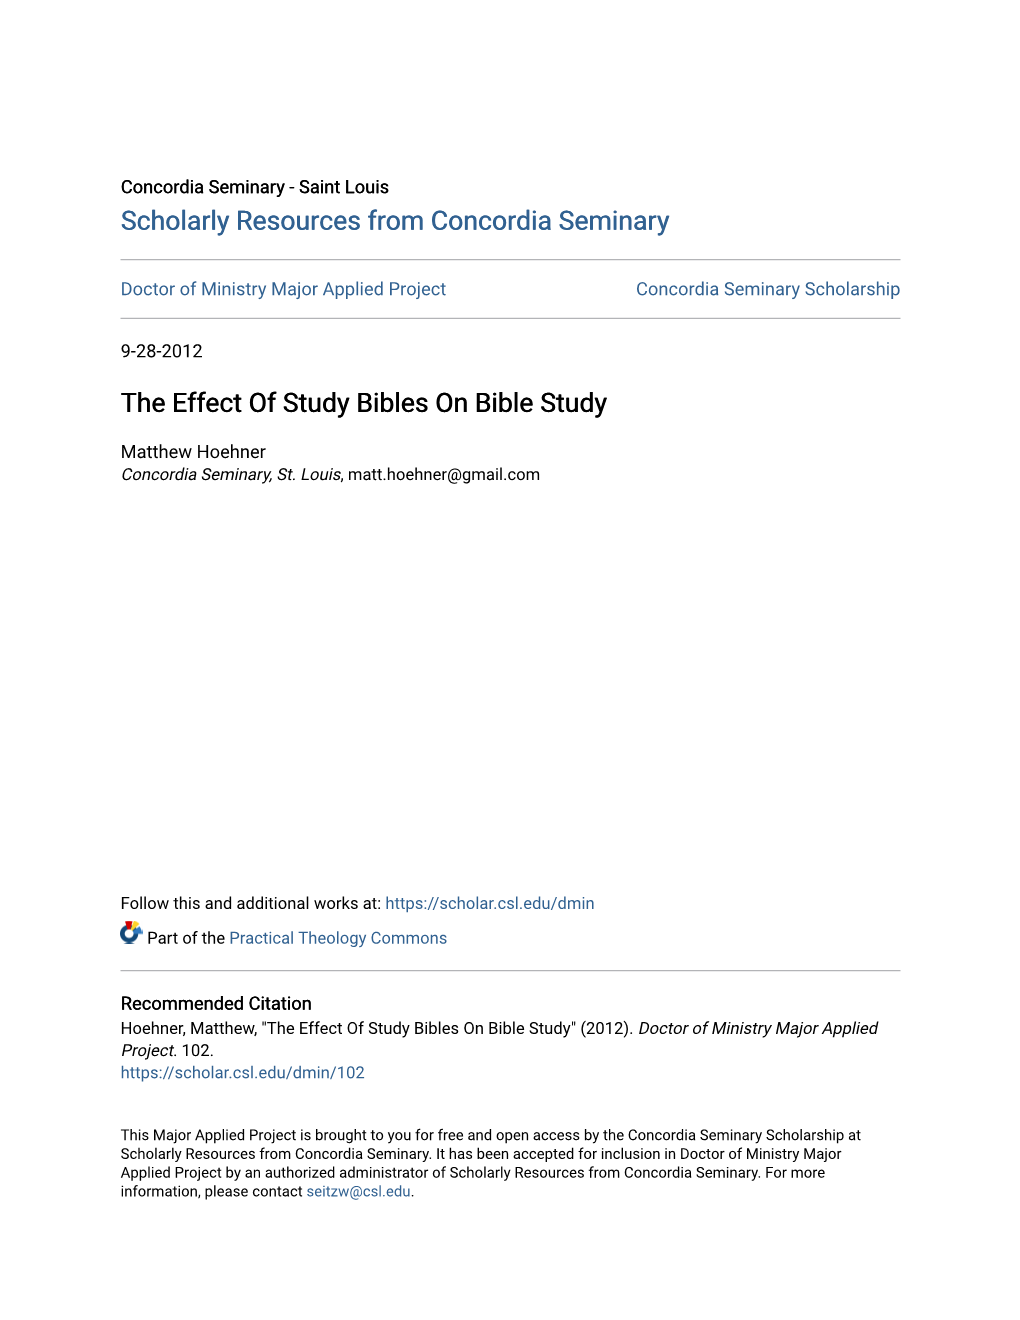 The Effect of Study Bibles on Bible Study